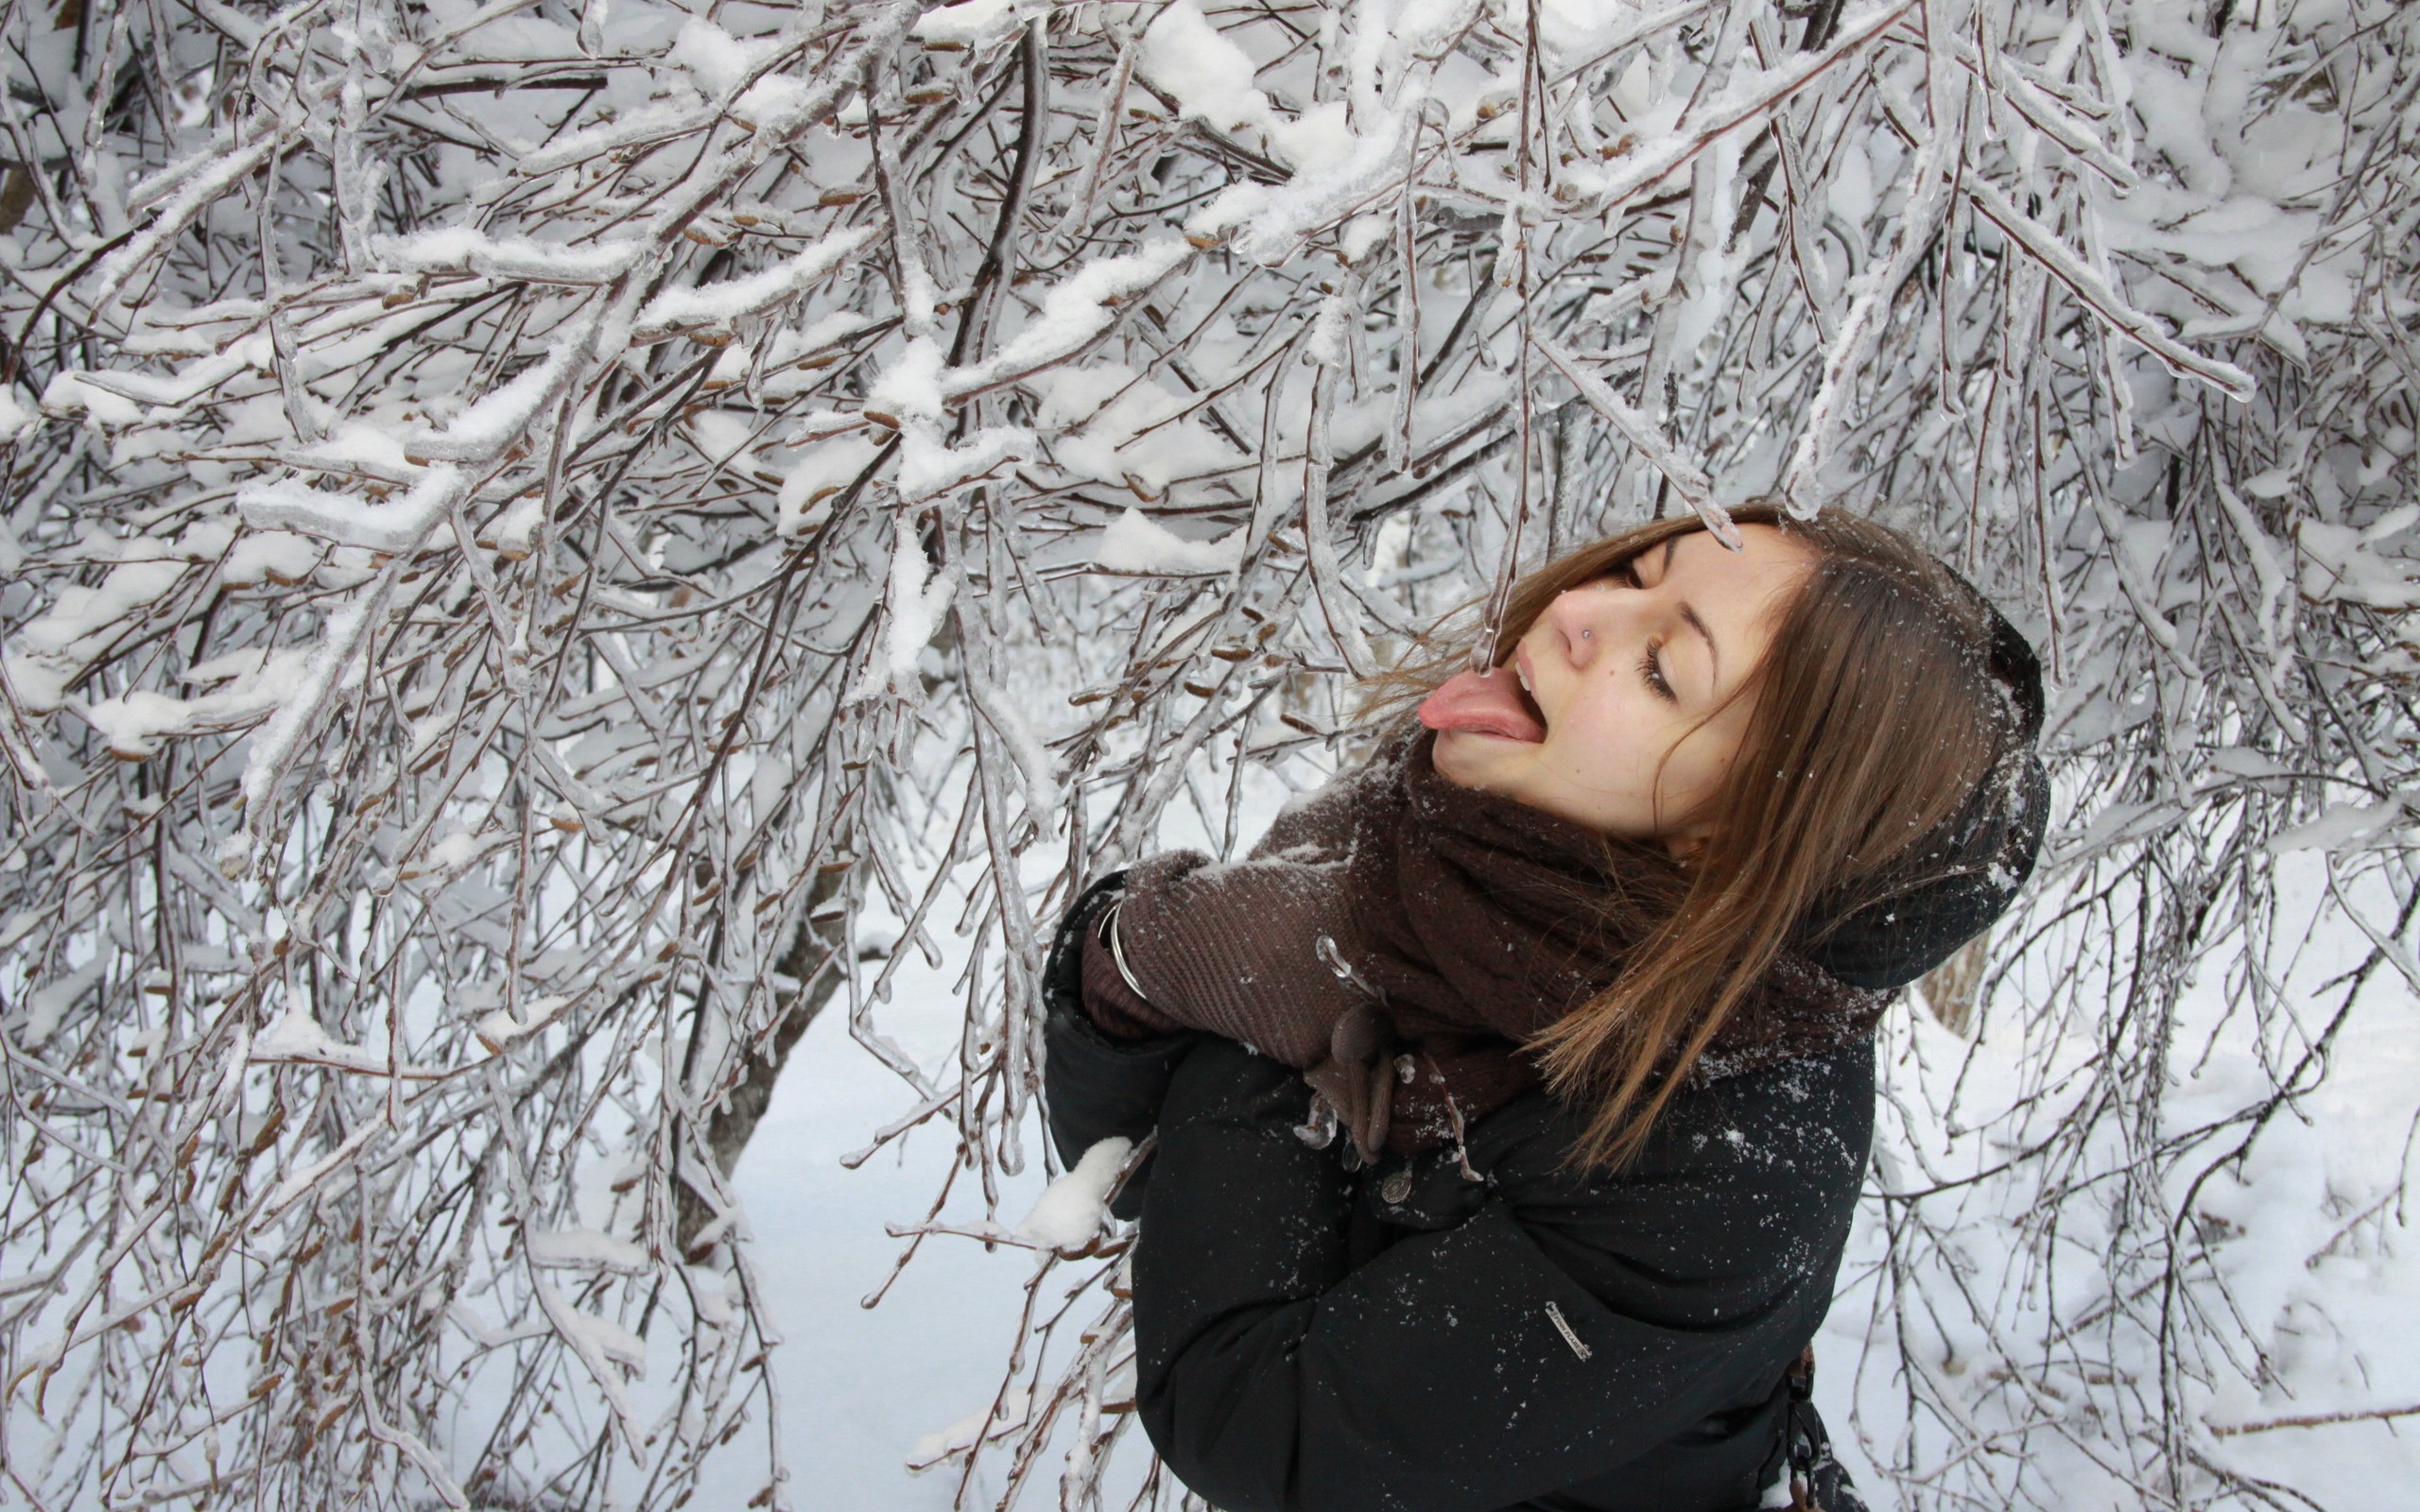 People 2560x1600 women snow winter brunette pierced nose mittens tongues black jackets tongue out cold outdoors open mouth scarf model trees branch women outdoors